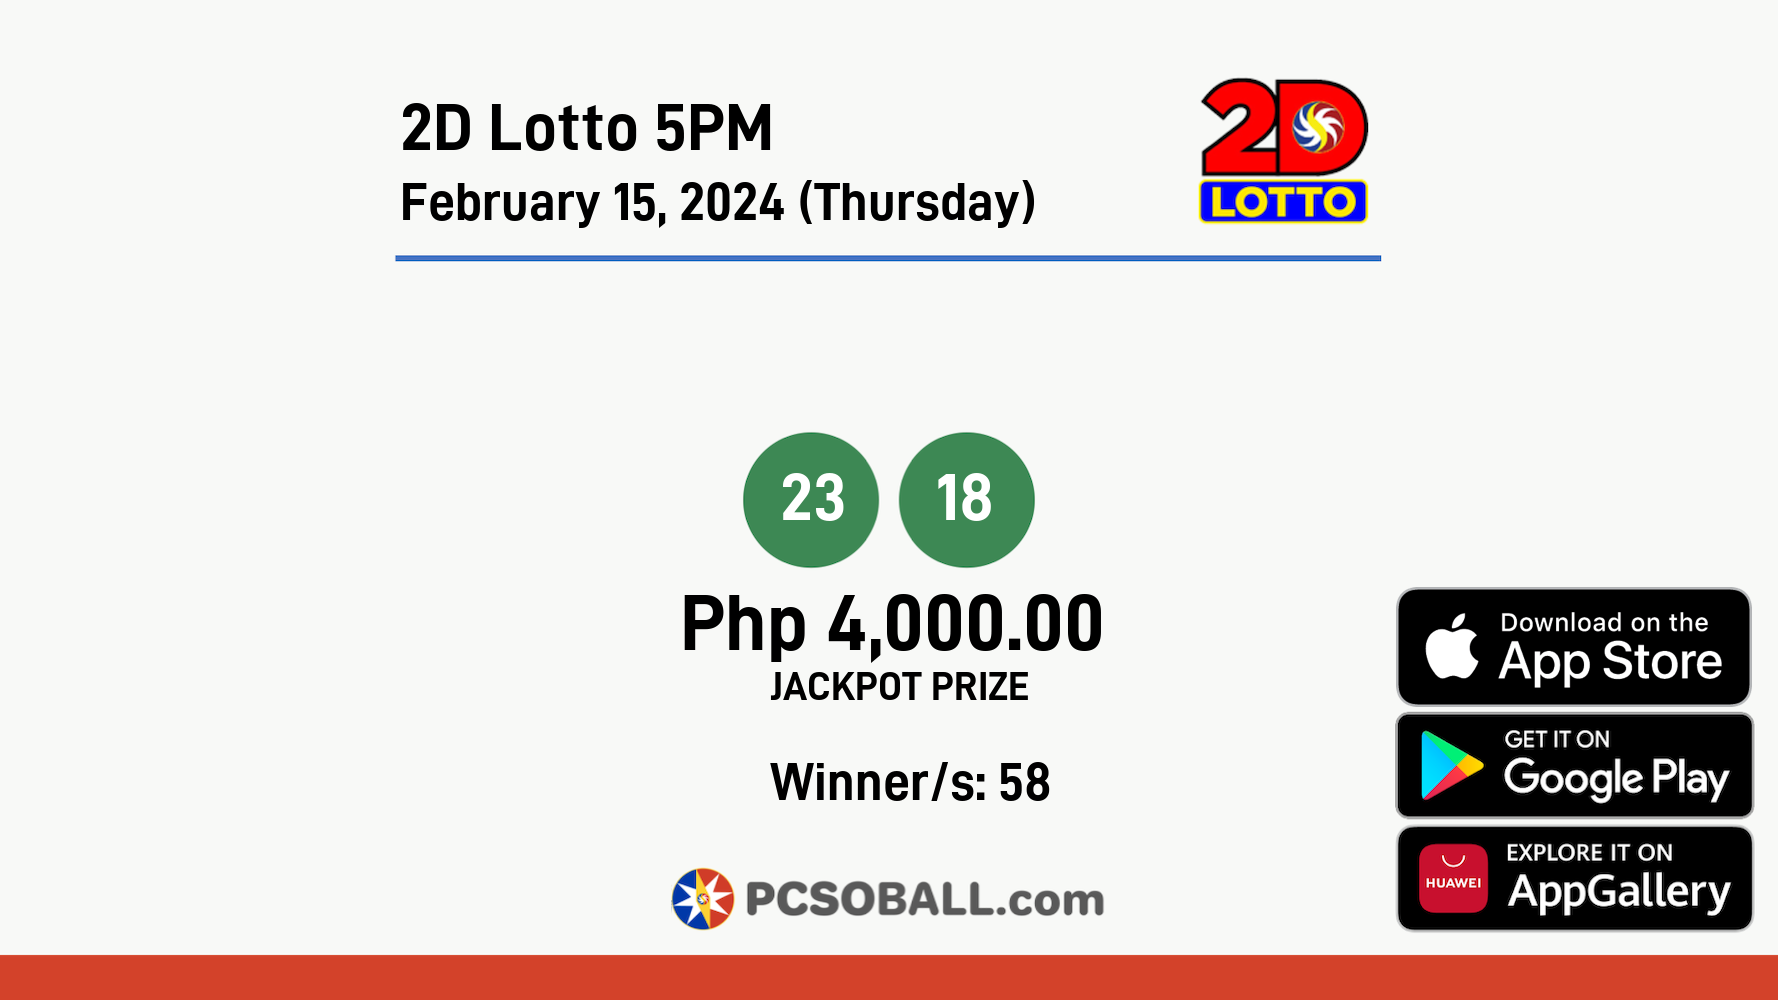 2D Lotto 5PM February 15, 2024 (Thursday) Result